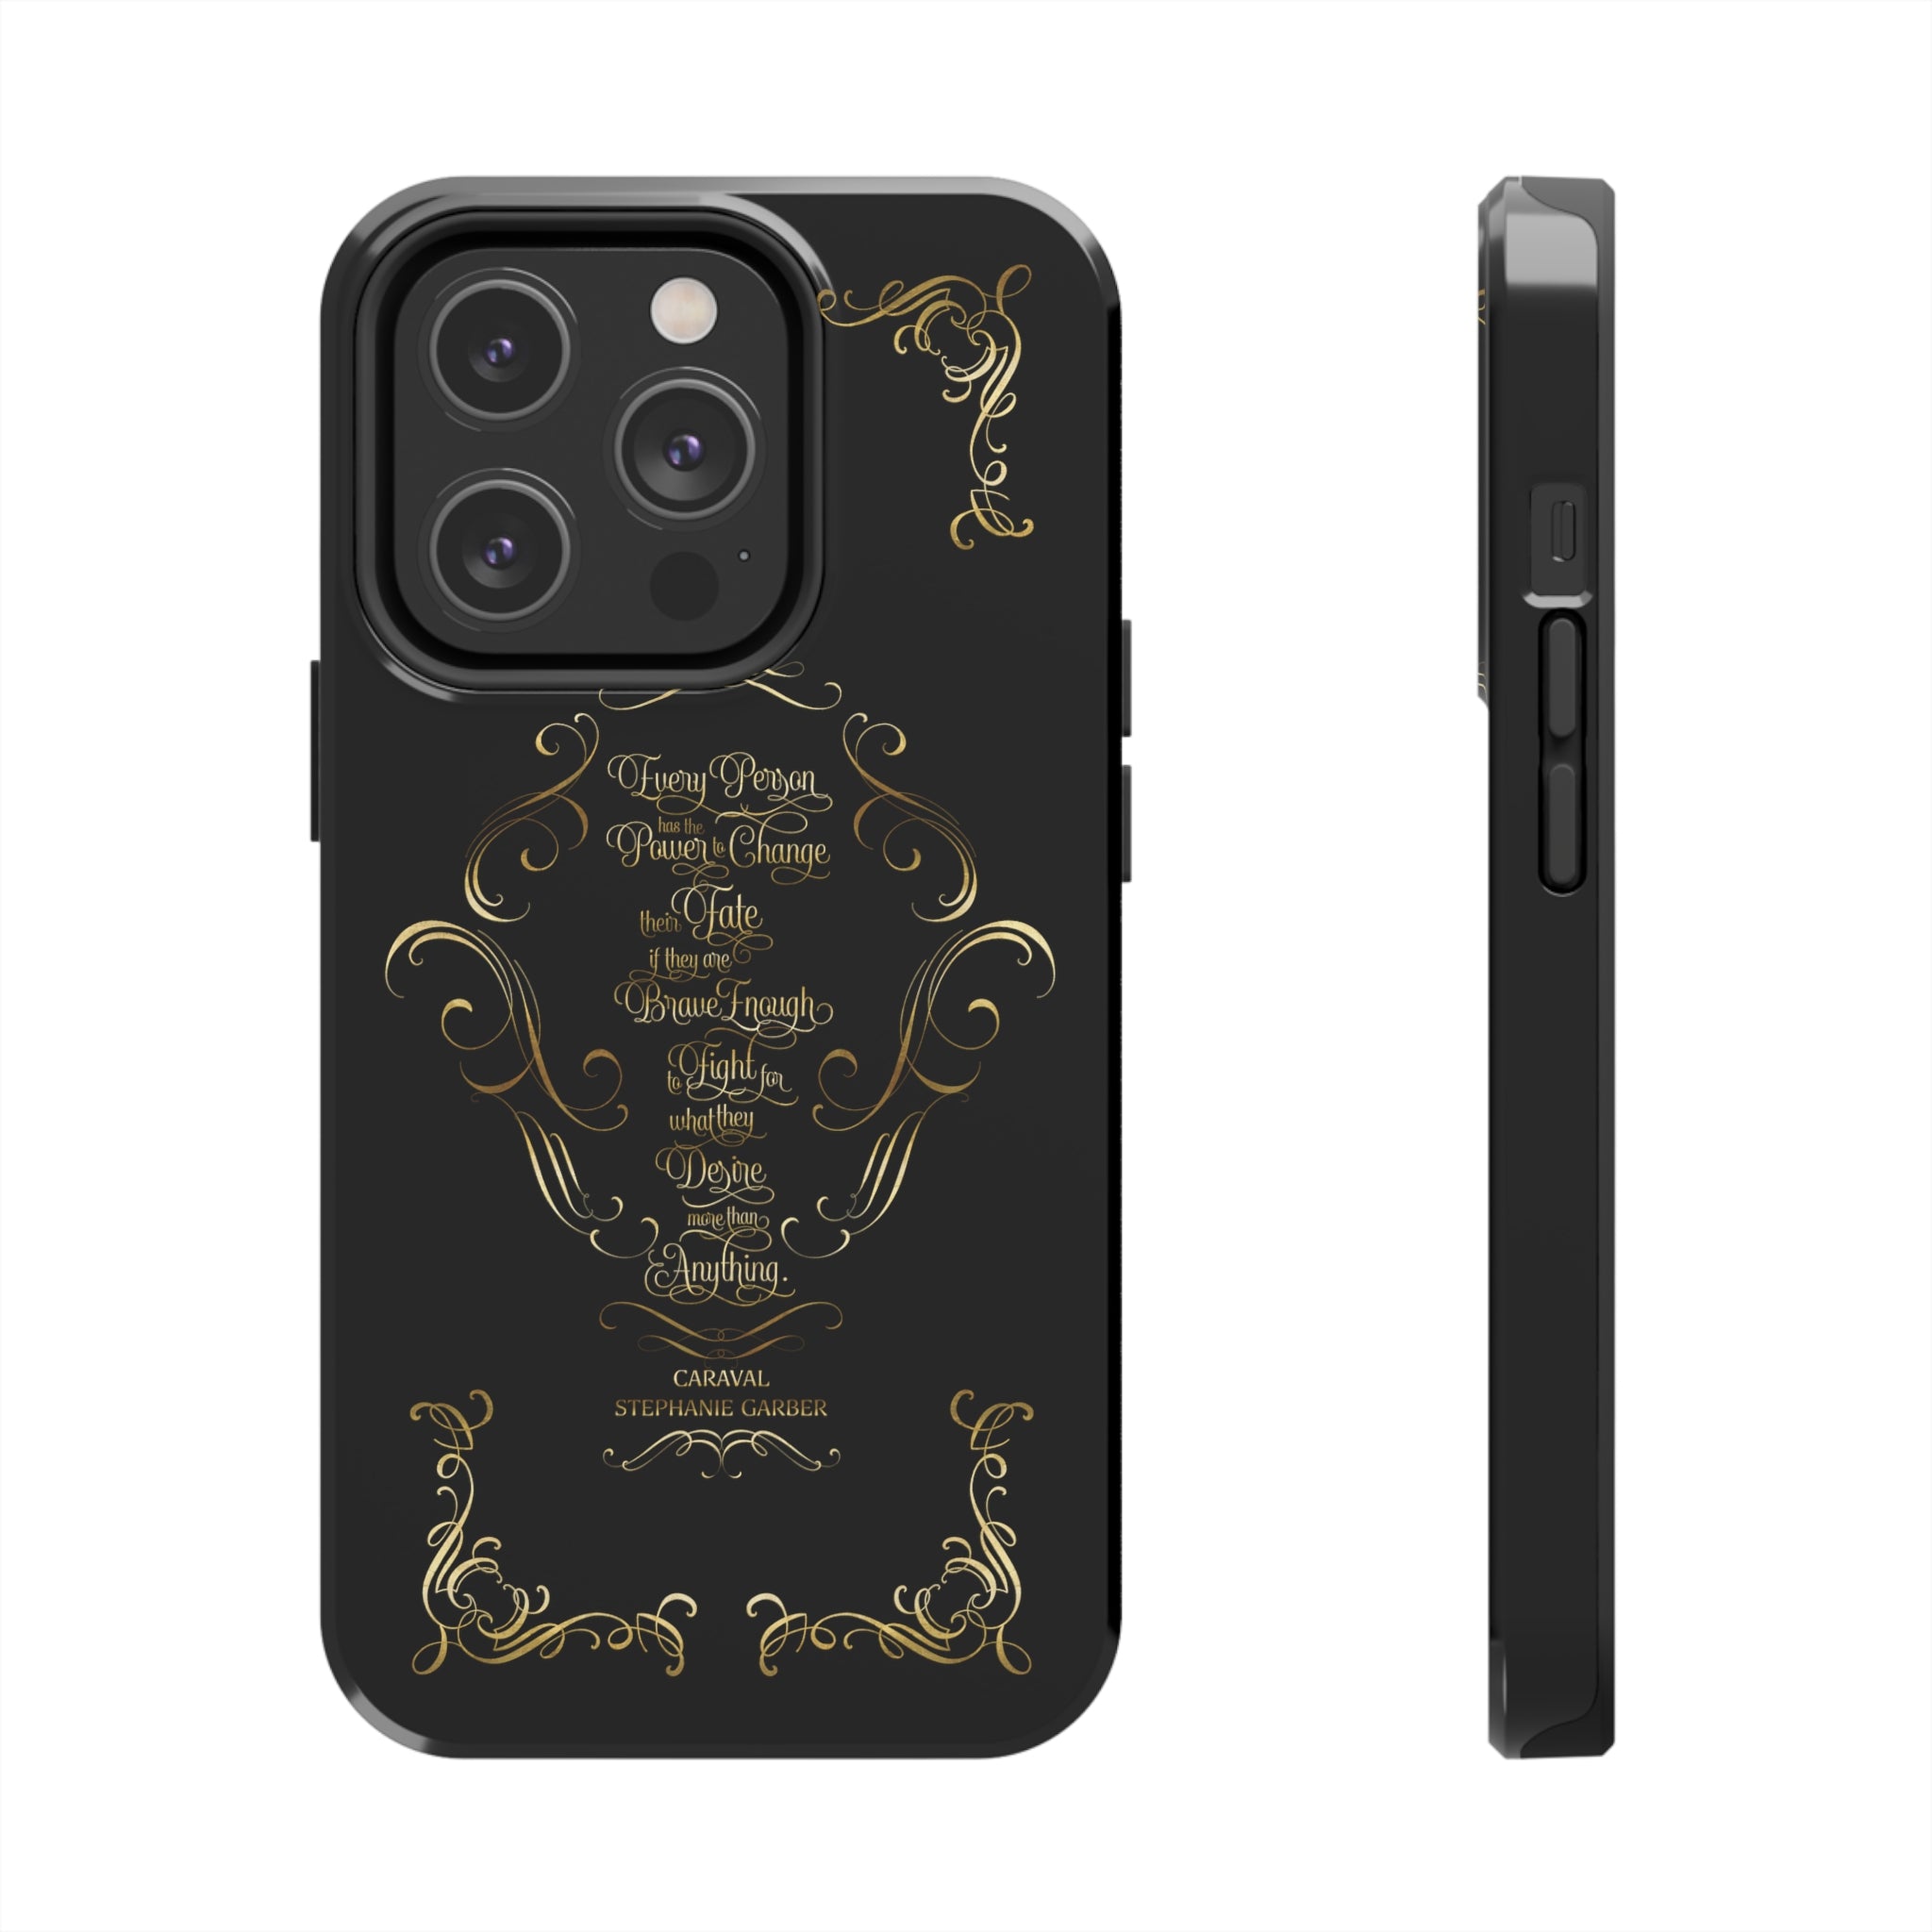 The Power to Change Fate. Caraval Tough iPhone Case